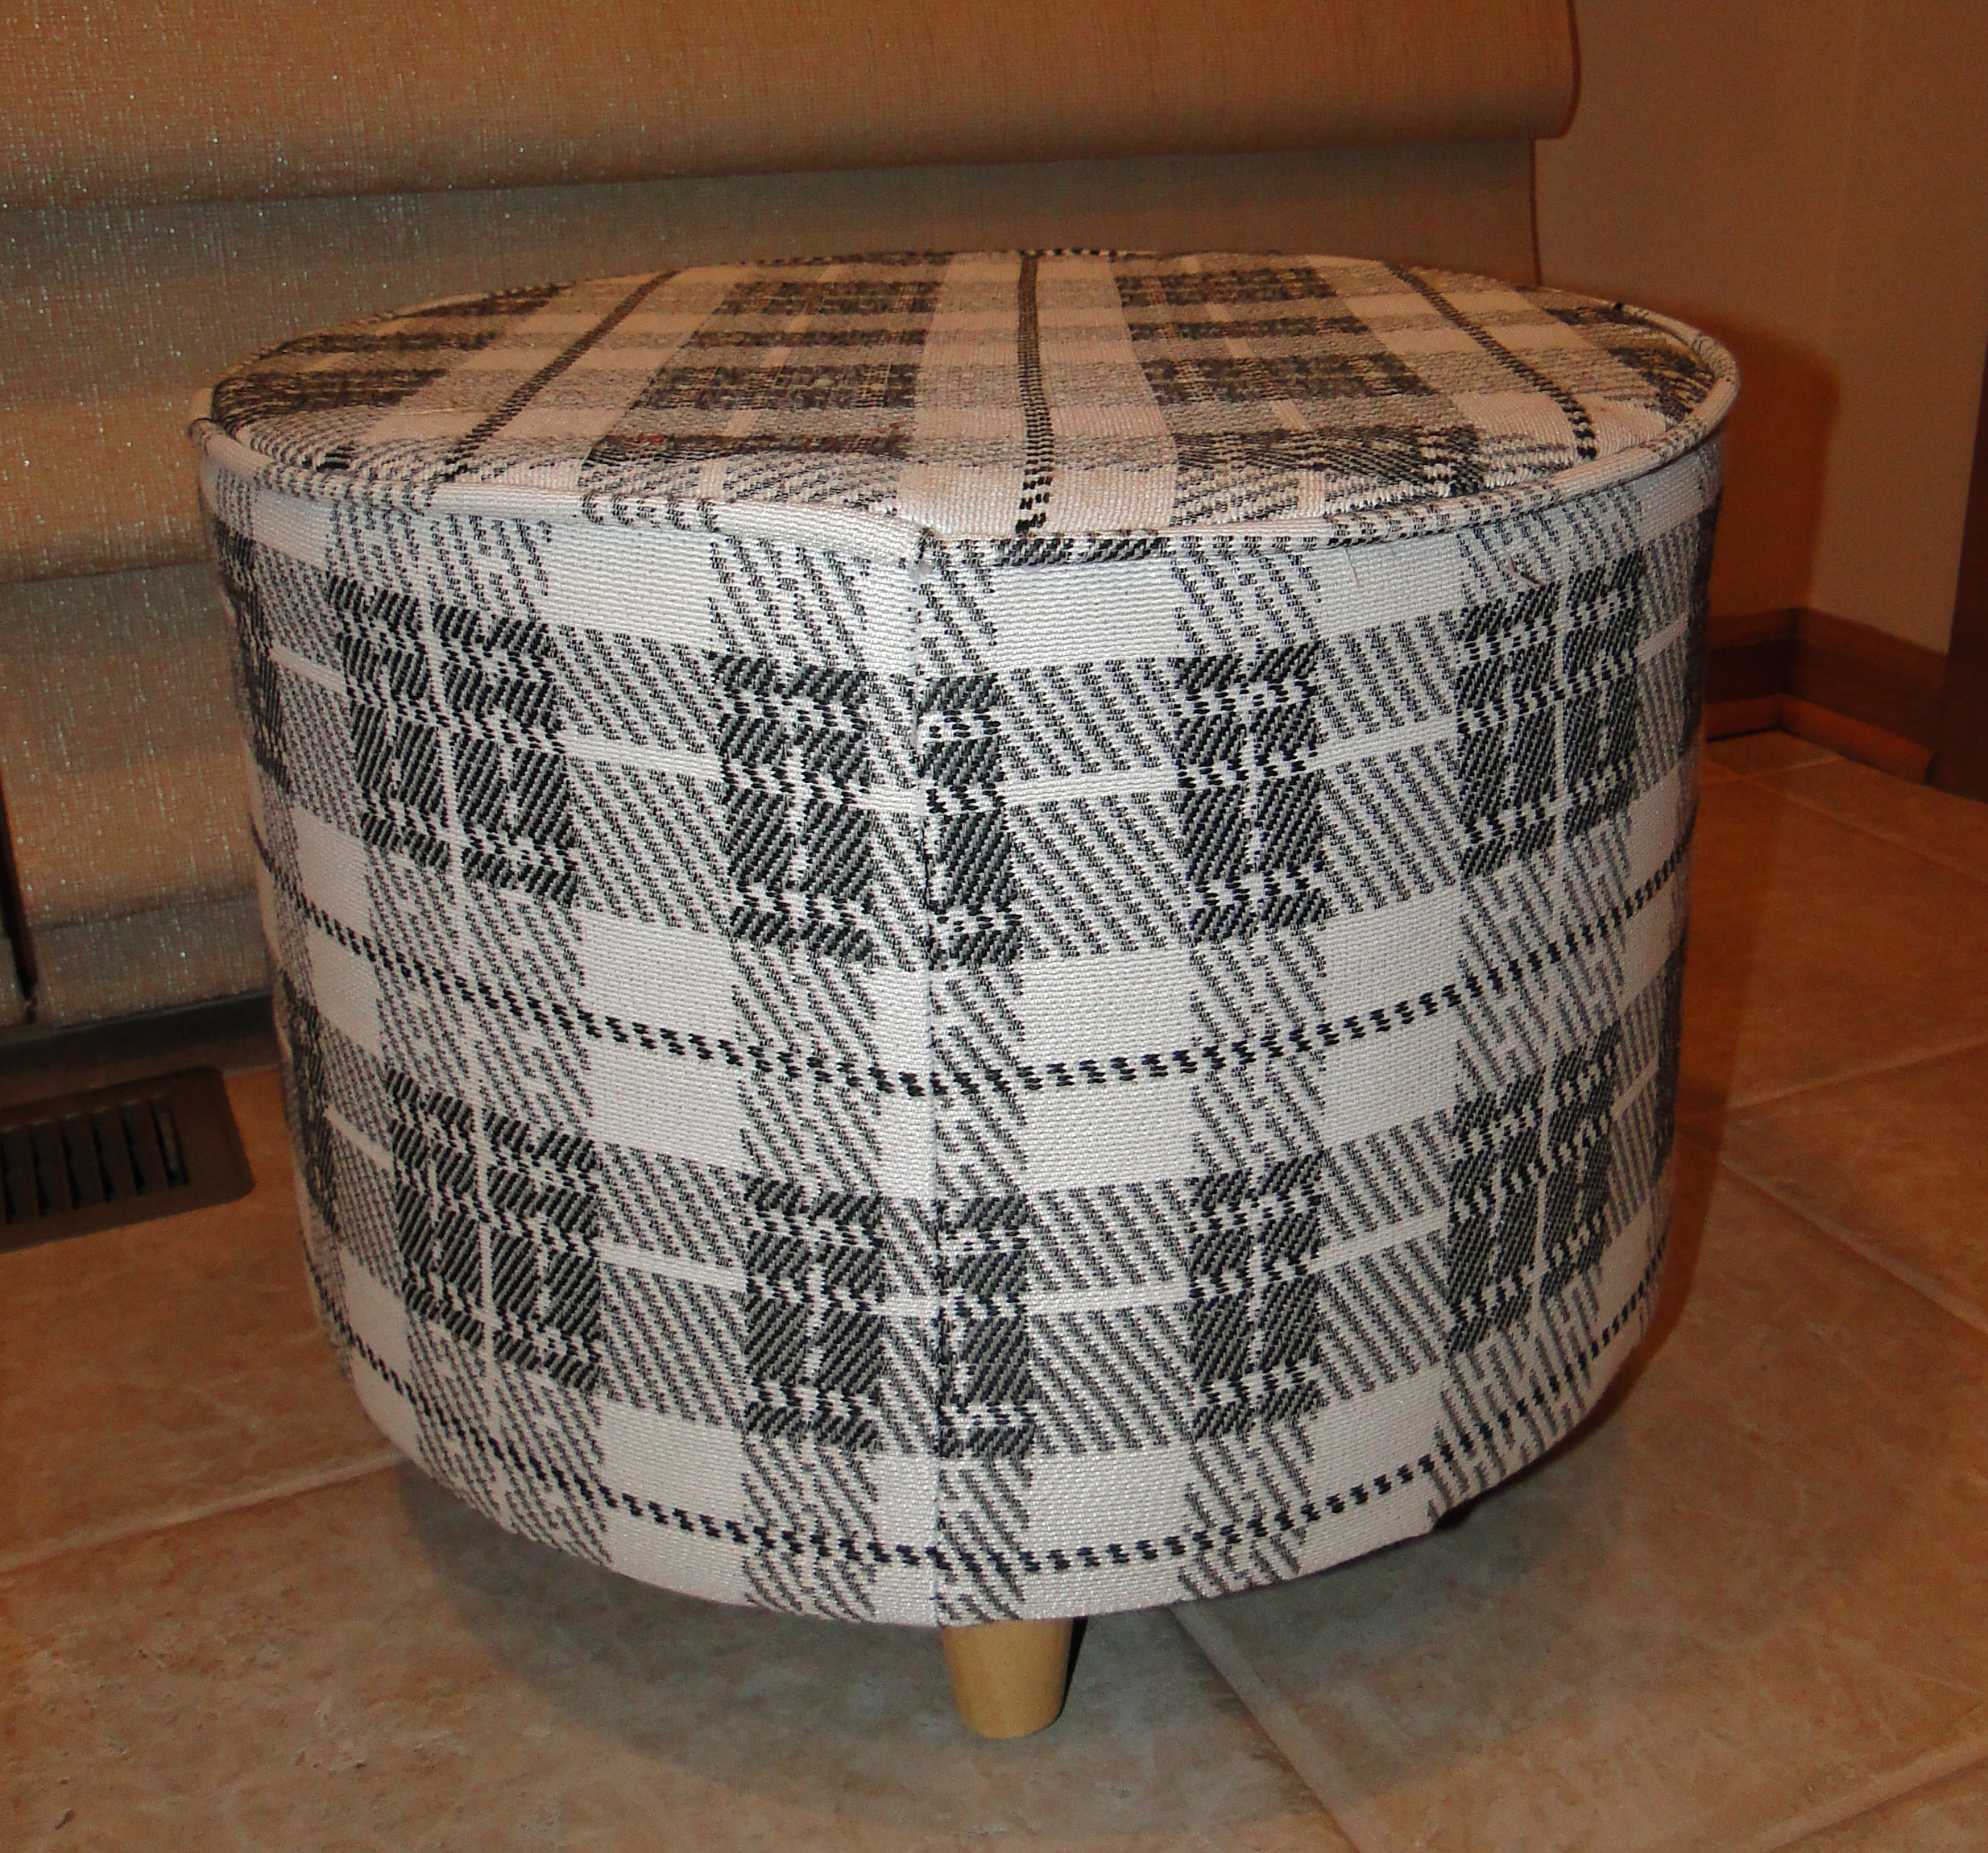 "Before" view of original fabric on ottoman